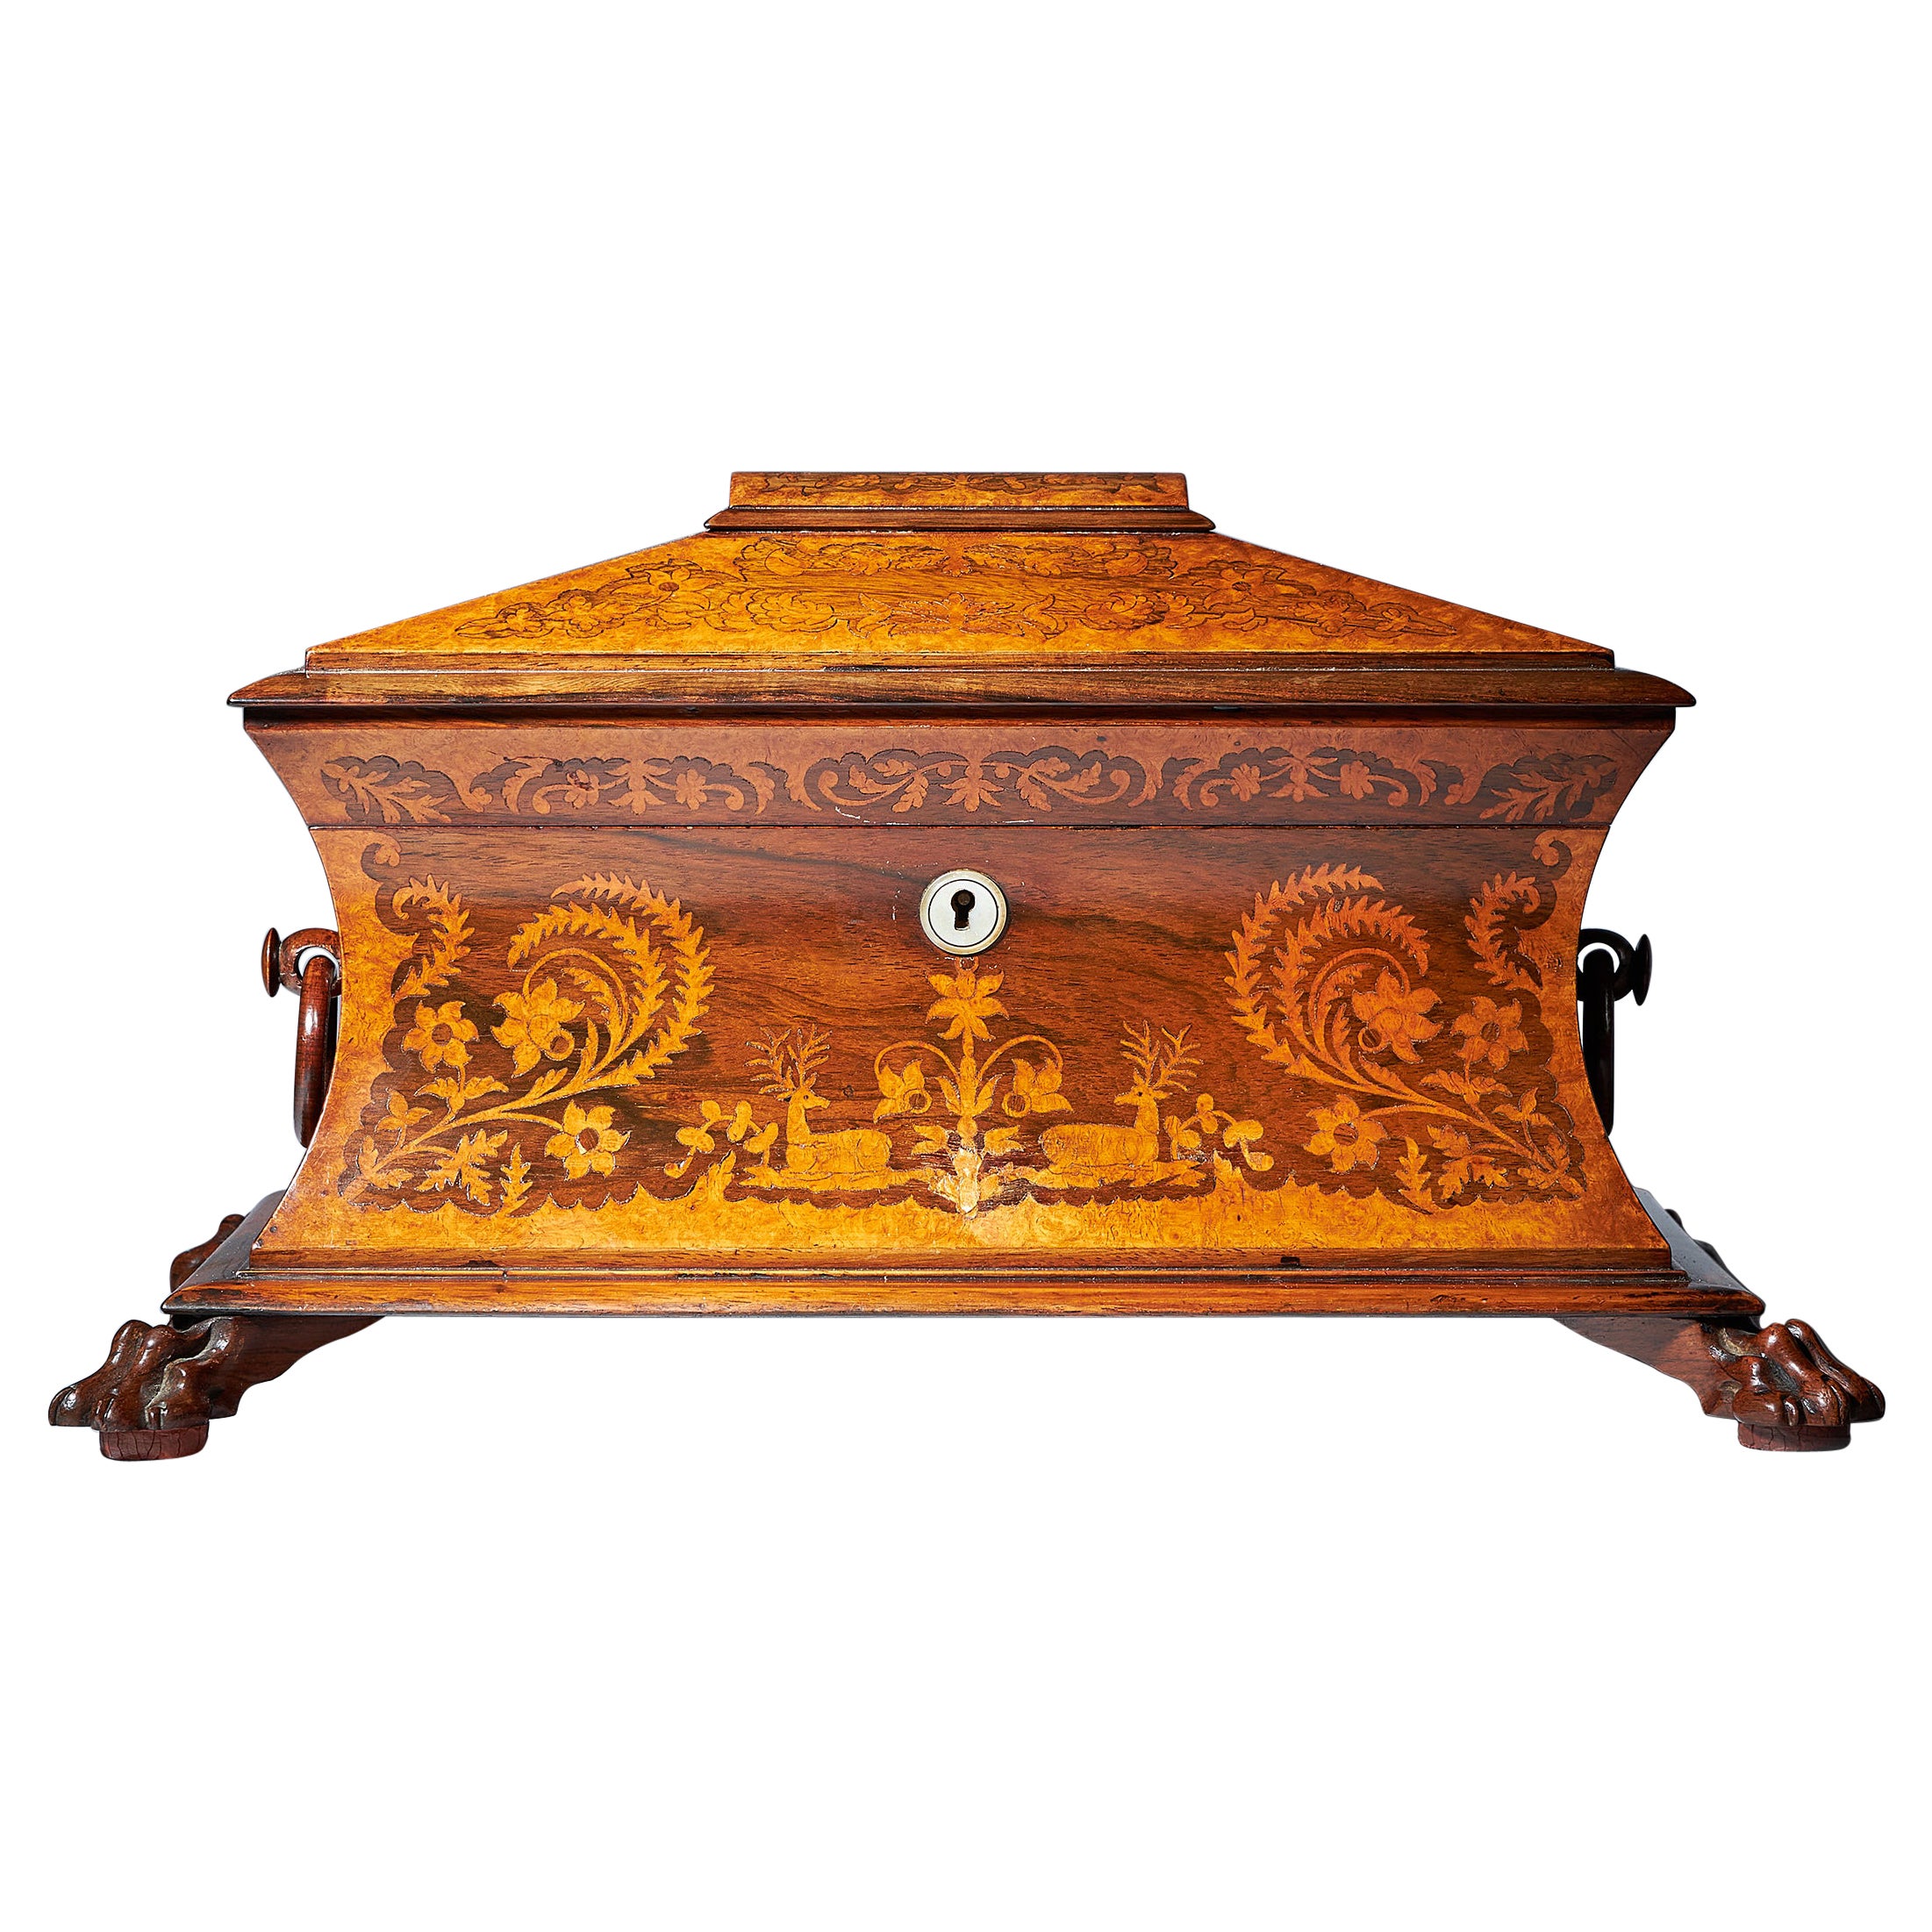 A fine and elegant Regancy George IV rosewood and amboyna wood marquetry sarcophagus tea caddy with carved solid rosewood lion paw feet and original fittings. 

Entirely decorated in marquetry of wild flora, the moulded caddy top of pyramid form